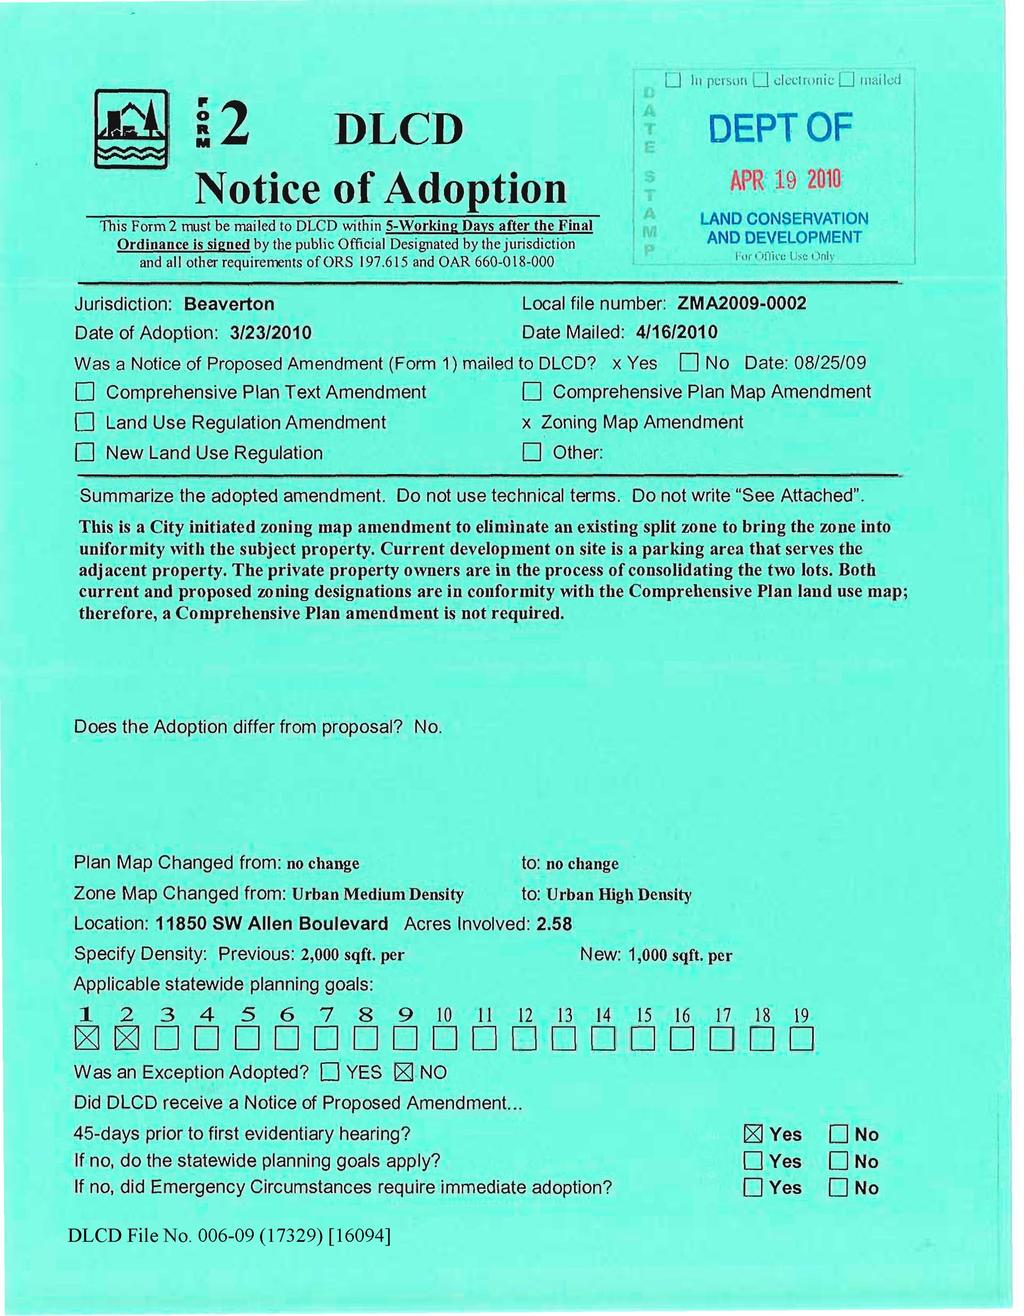 [_1 lit person <_J cieeirwric [ZI 'nailed DLCD Notice of Adoption DEPT OF APR 19 2010 LAND CONSERVATION AND DEVELOPMENT This Form 2 must be mailed to DLCD within 5-Working Days after the Final